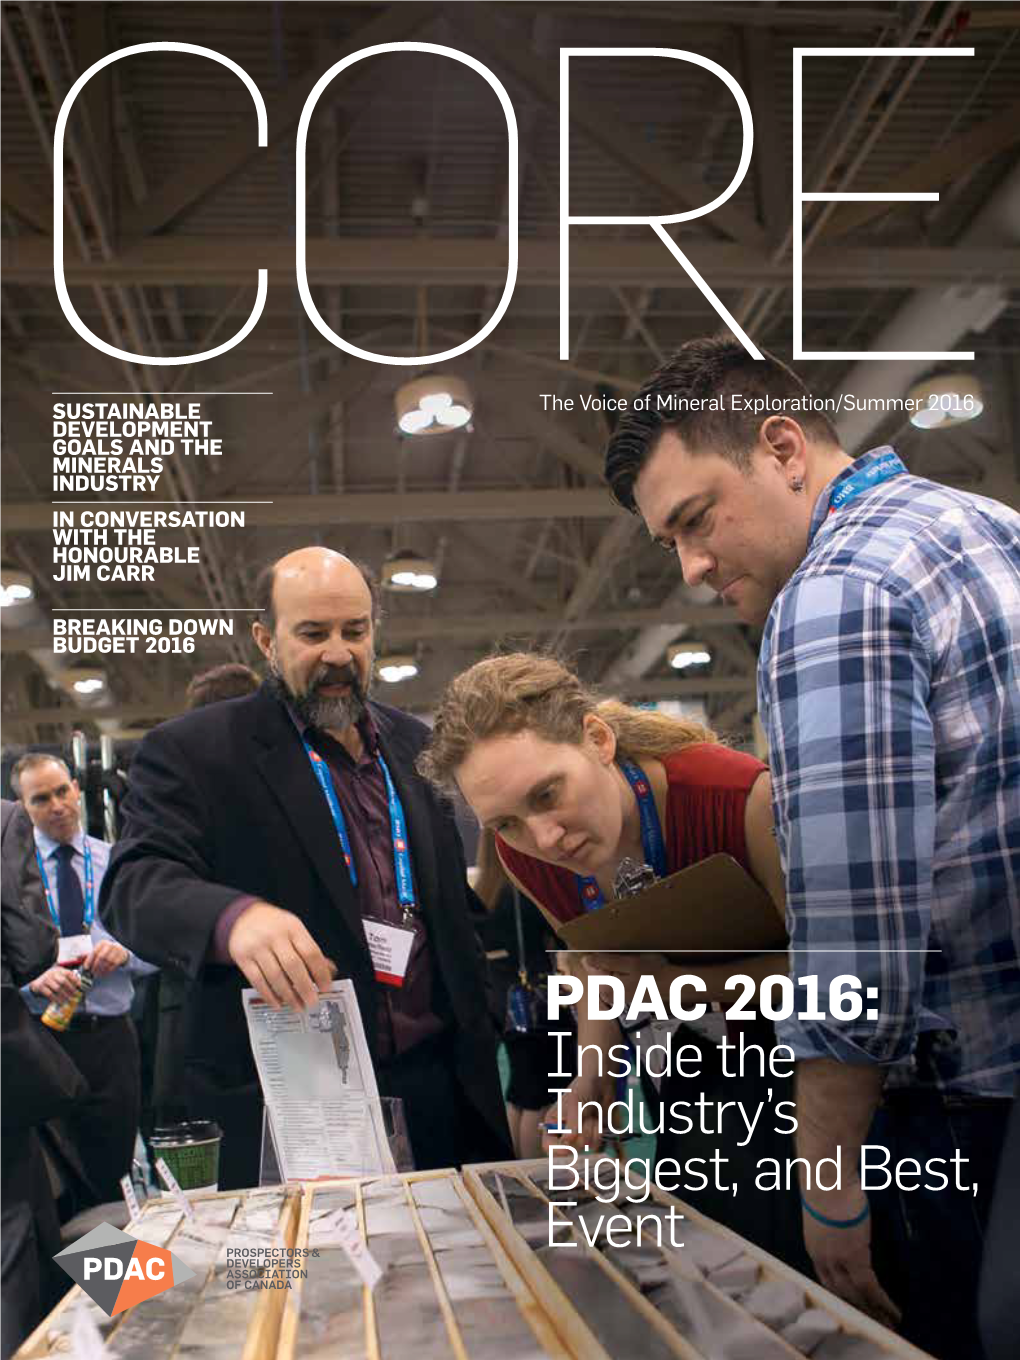 PDAC 2016: Inside the Industry's Biggest, and Best, Event